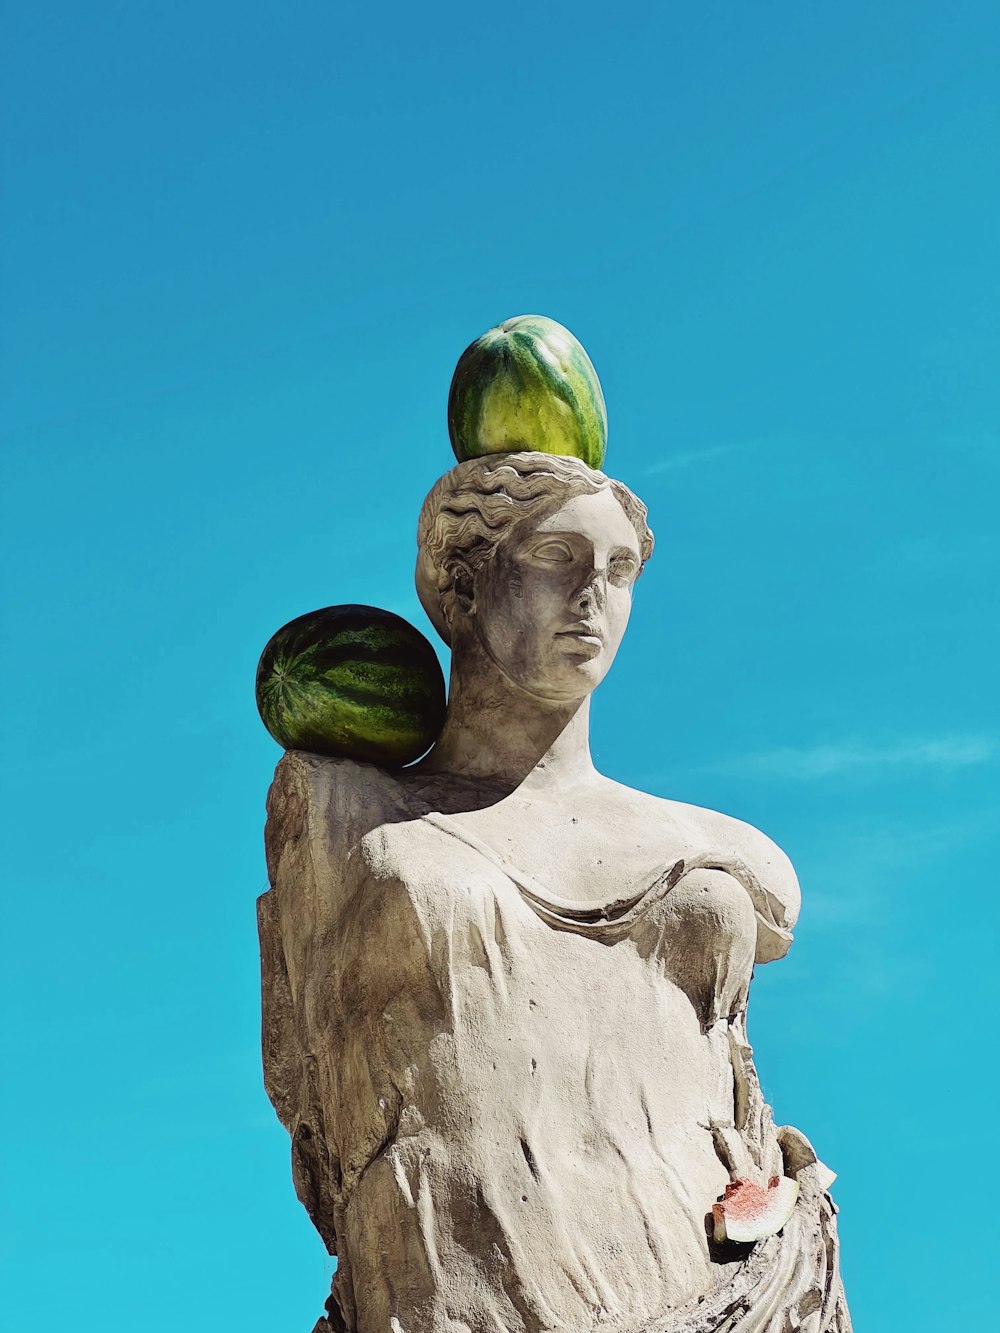 a statue of a woman with a watermelon on her head